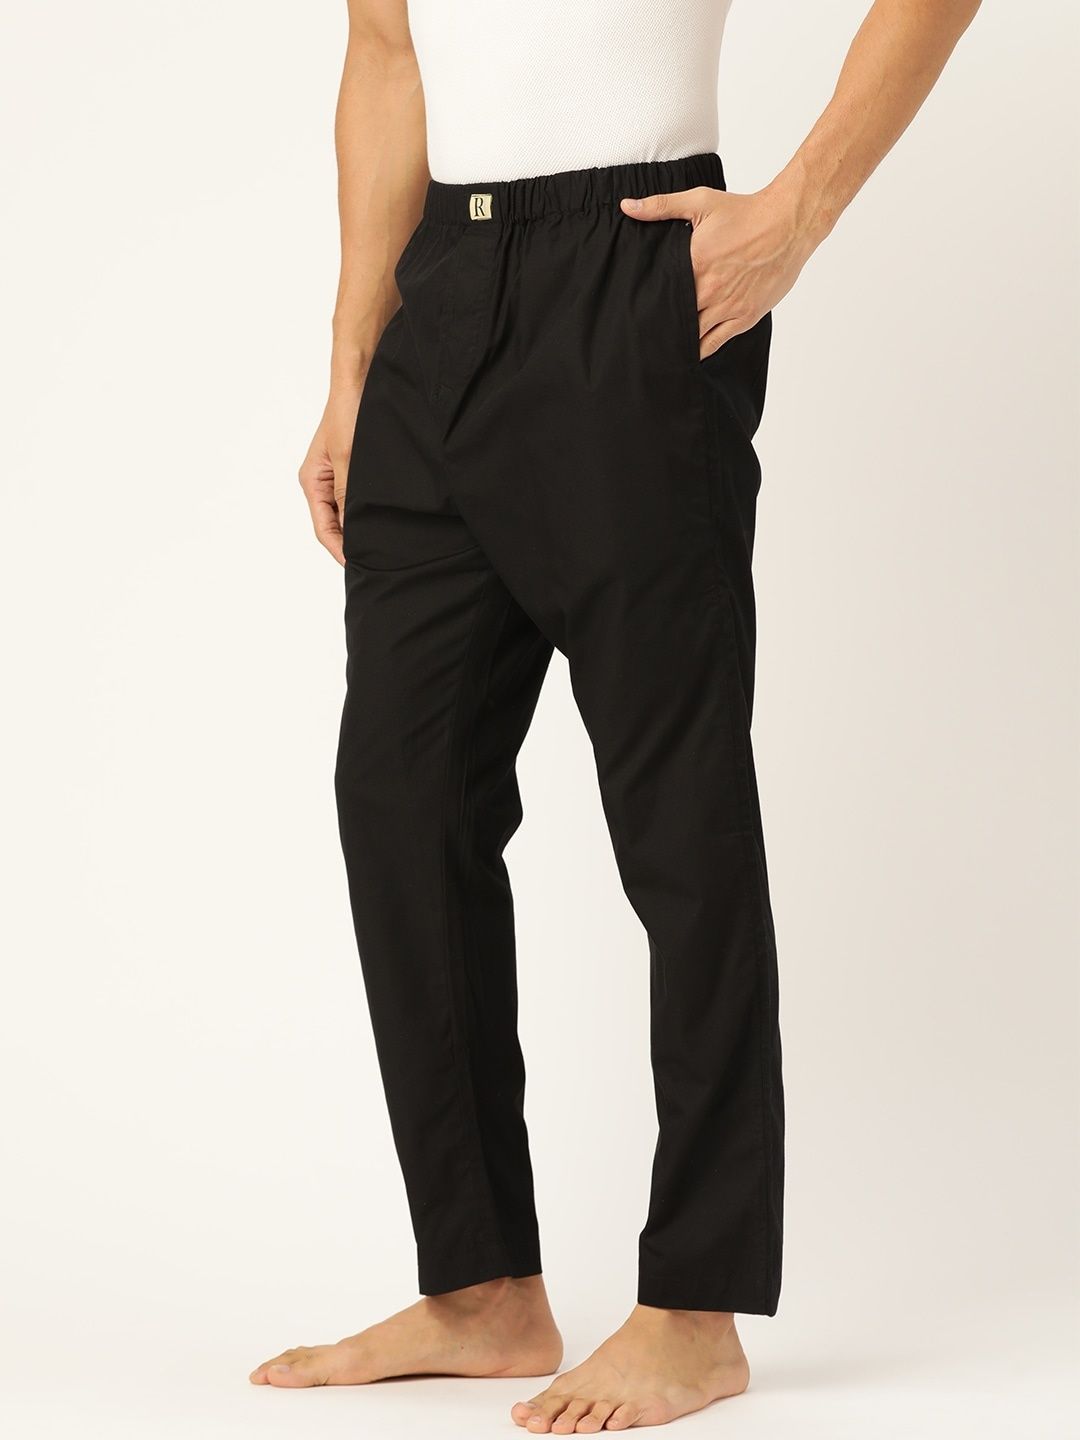 Black Pure Cotton Elastic Lounge Wear Pajama Pant Online In India Color ...